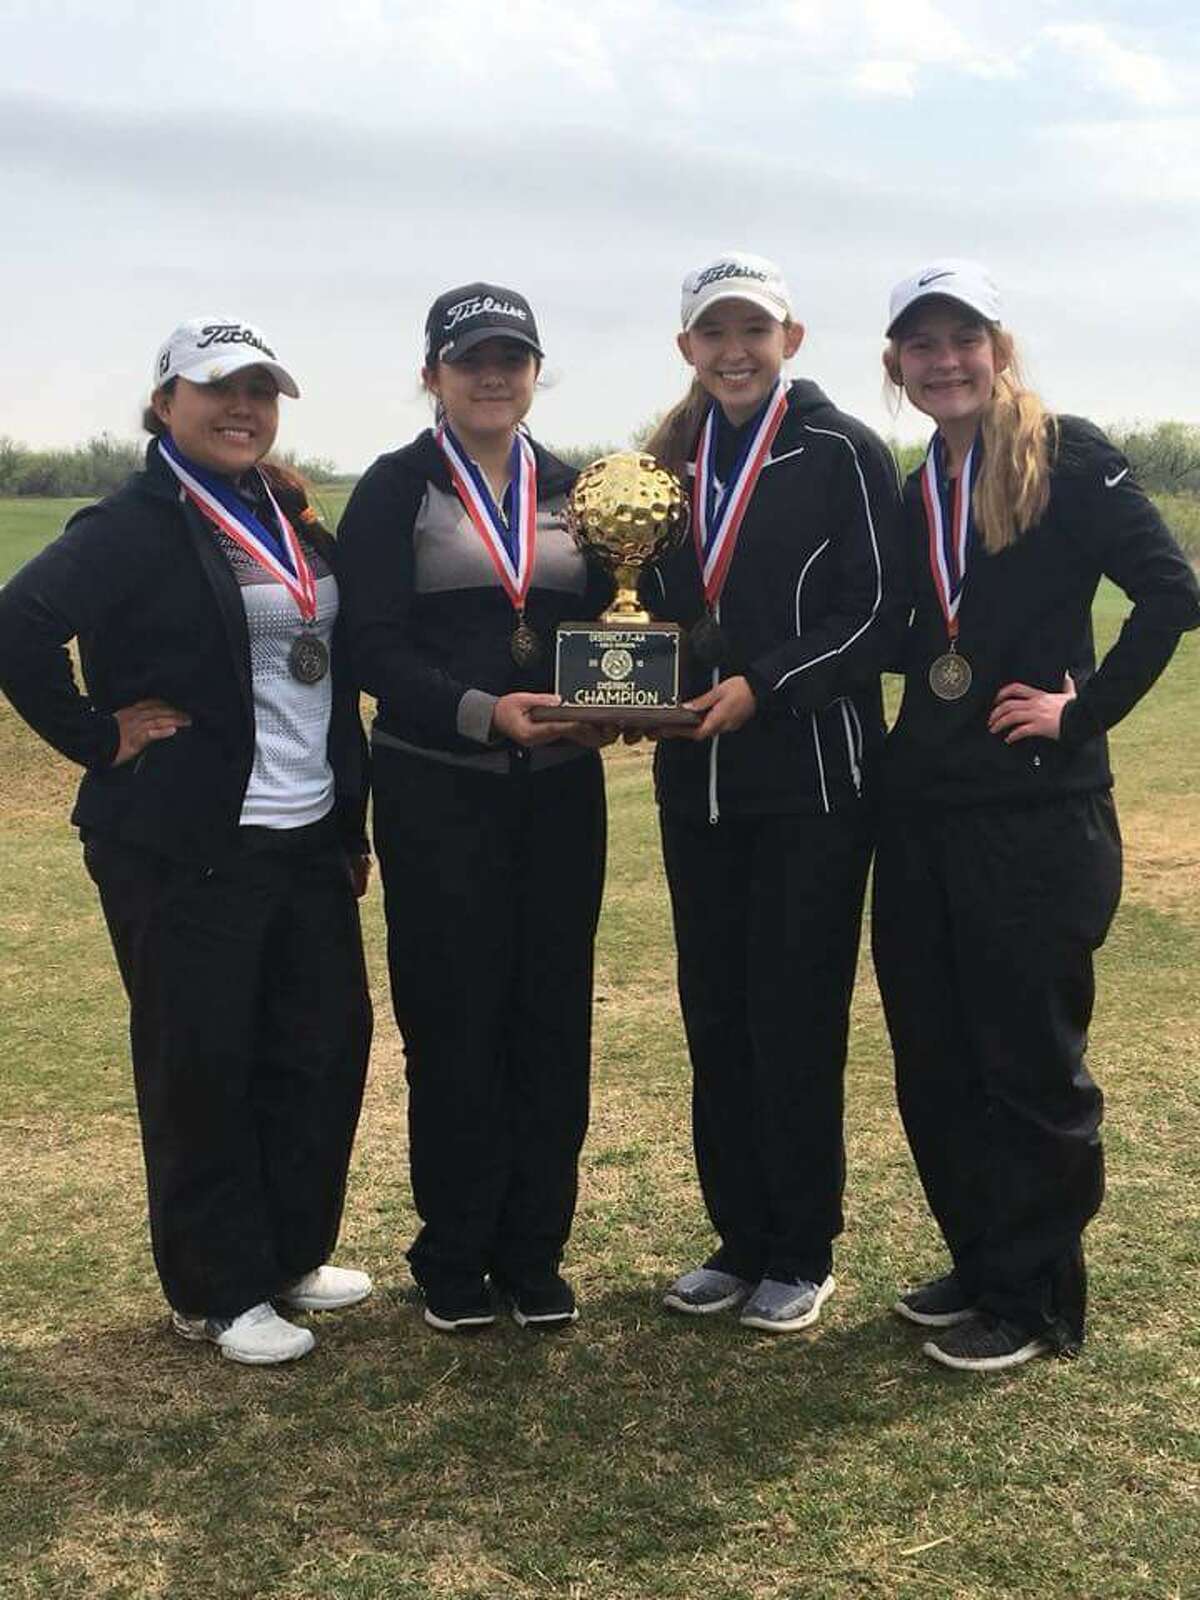 The Forsan girls golf team, from left, Razyl Yanez, Alexis Stercks, Jillian Jones and Sara Tarbet, pose after winning the District 7-2A championship April 2 in San Angelo. Courtesy photo